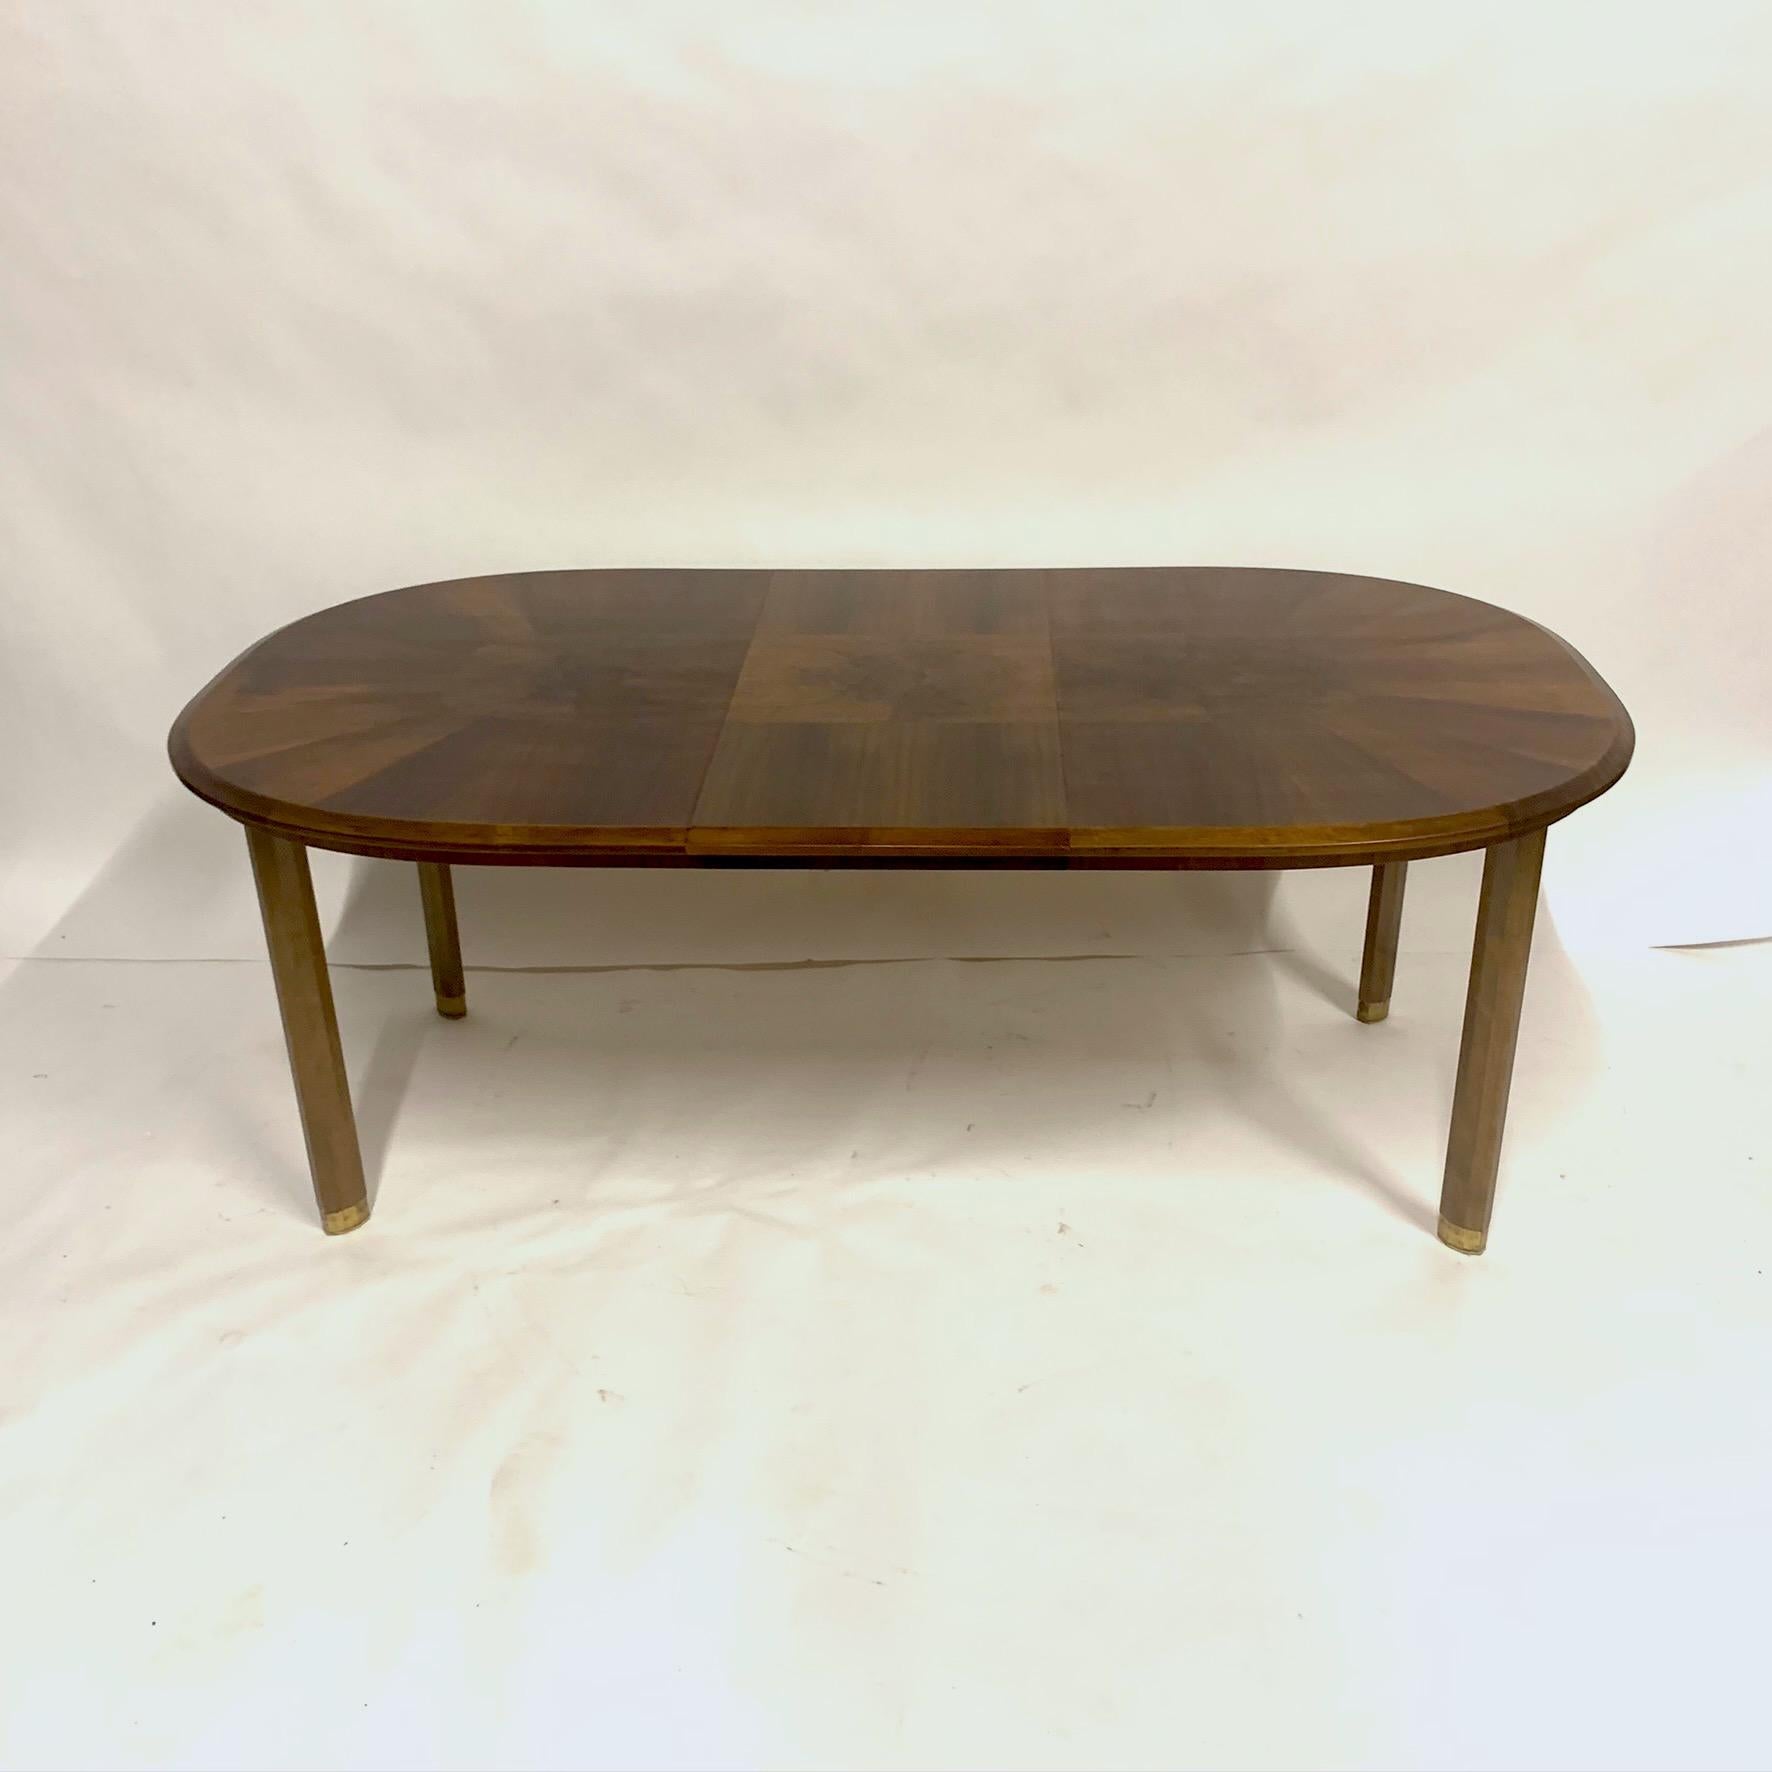 Edmond J. Spence Mixed Wood Oval Extension Dining Table w Burled Elm & Walnut y 3